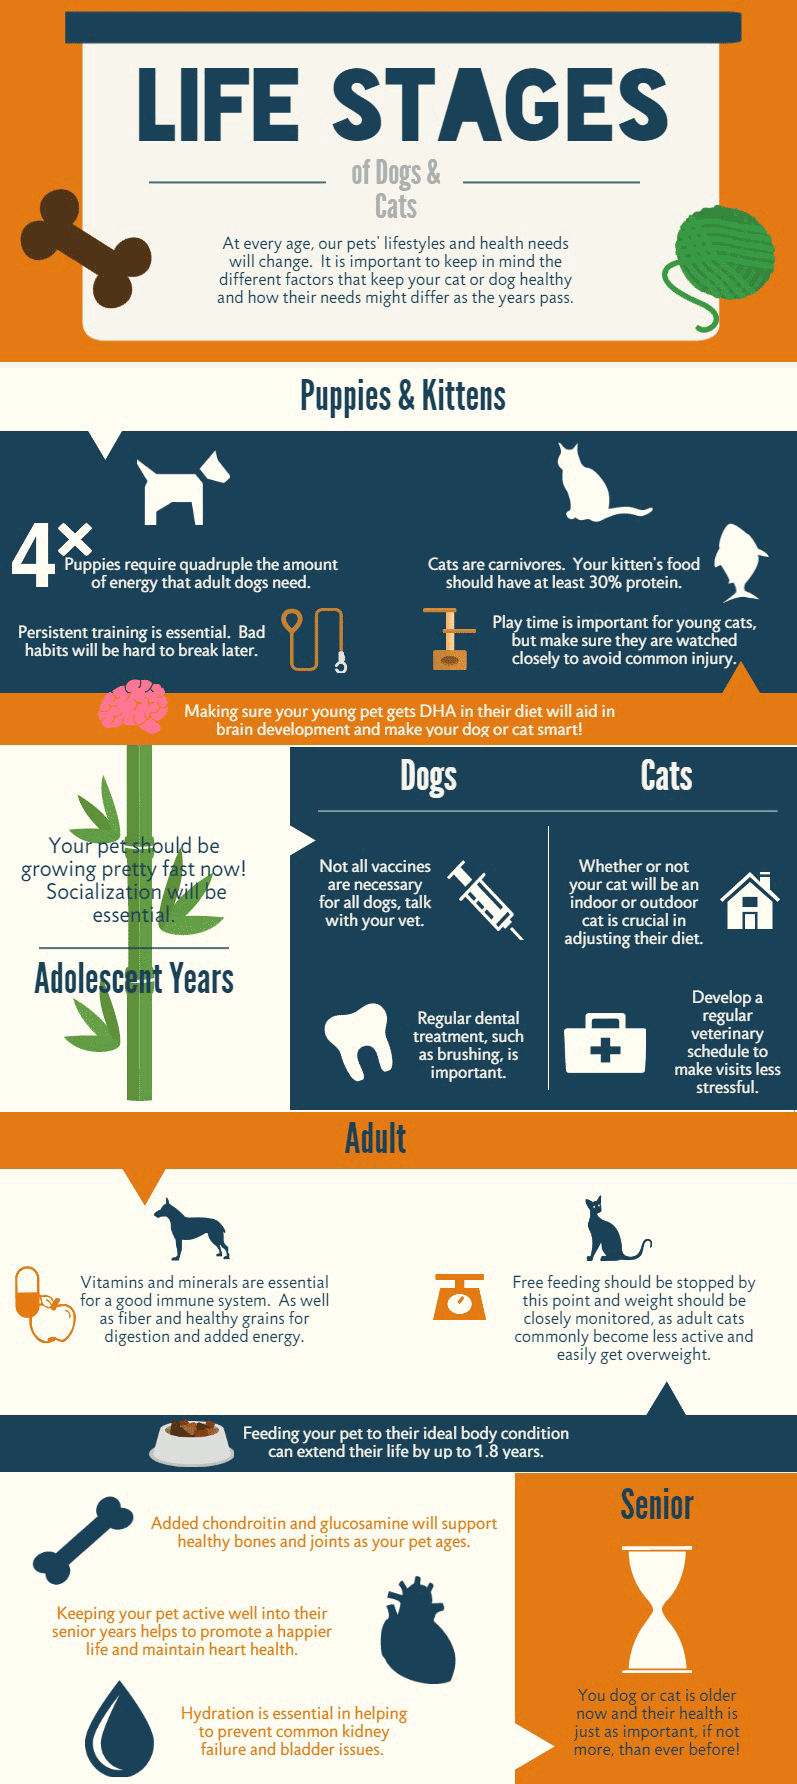 Life Stages of Dogs and Cats | New Petbrosia Infographic